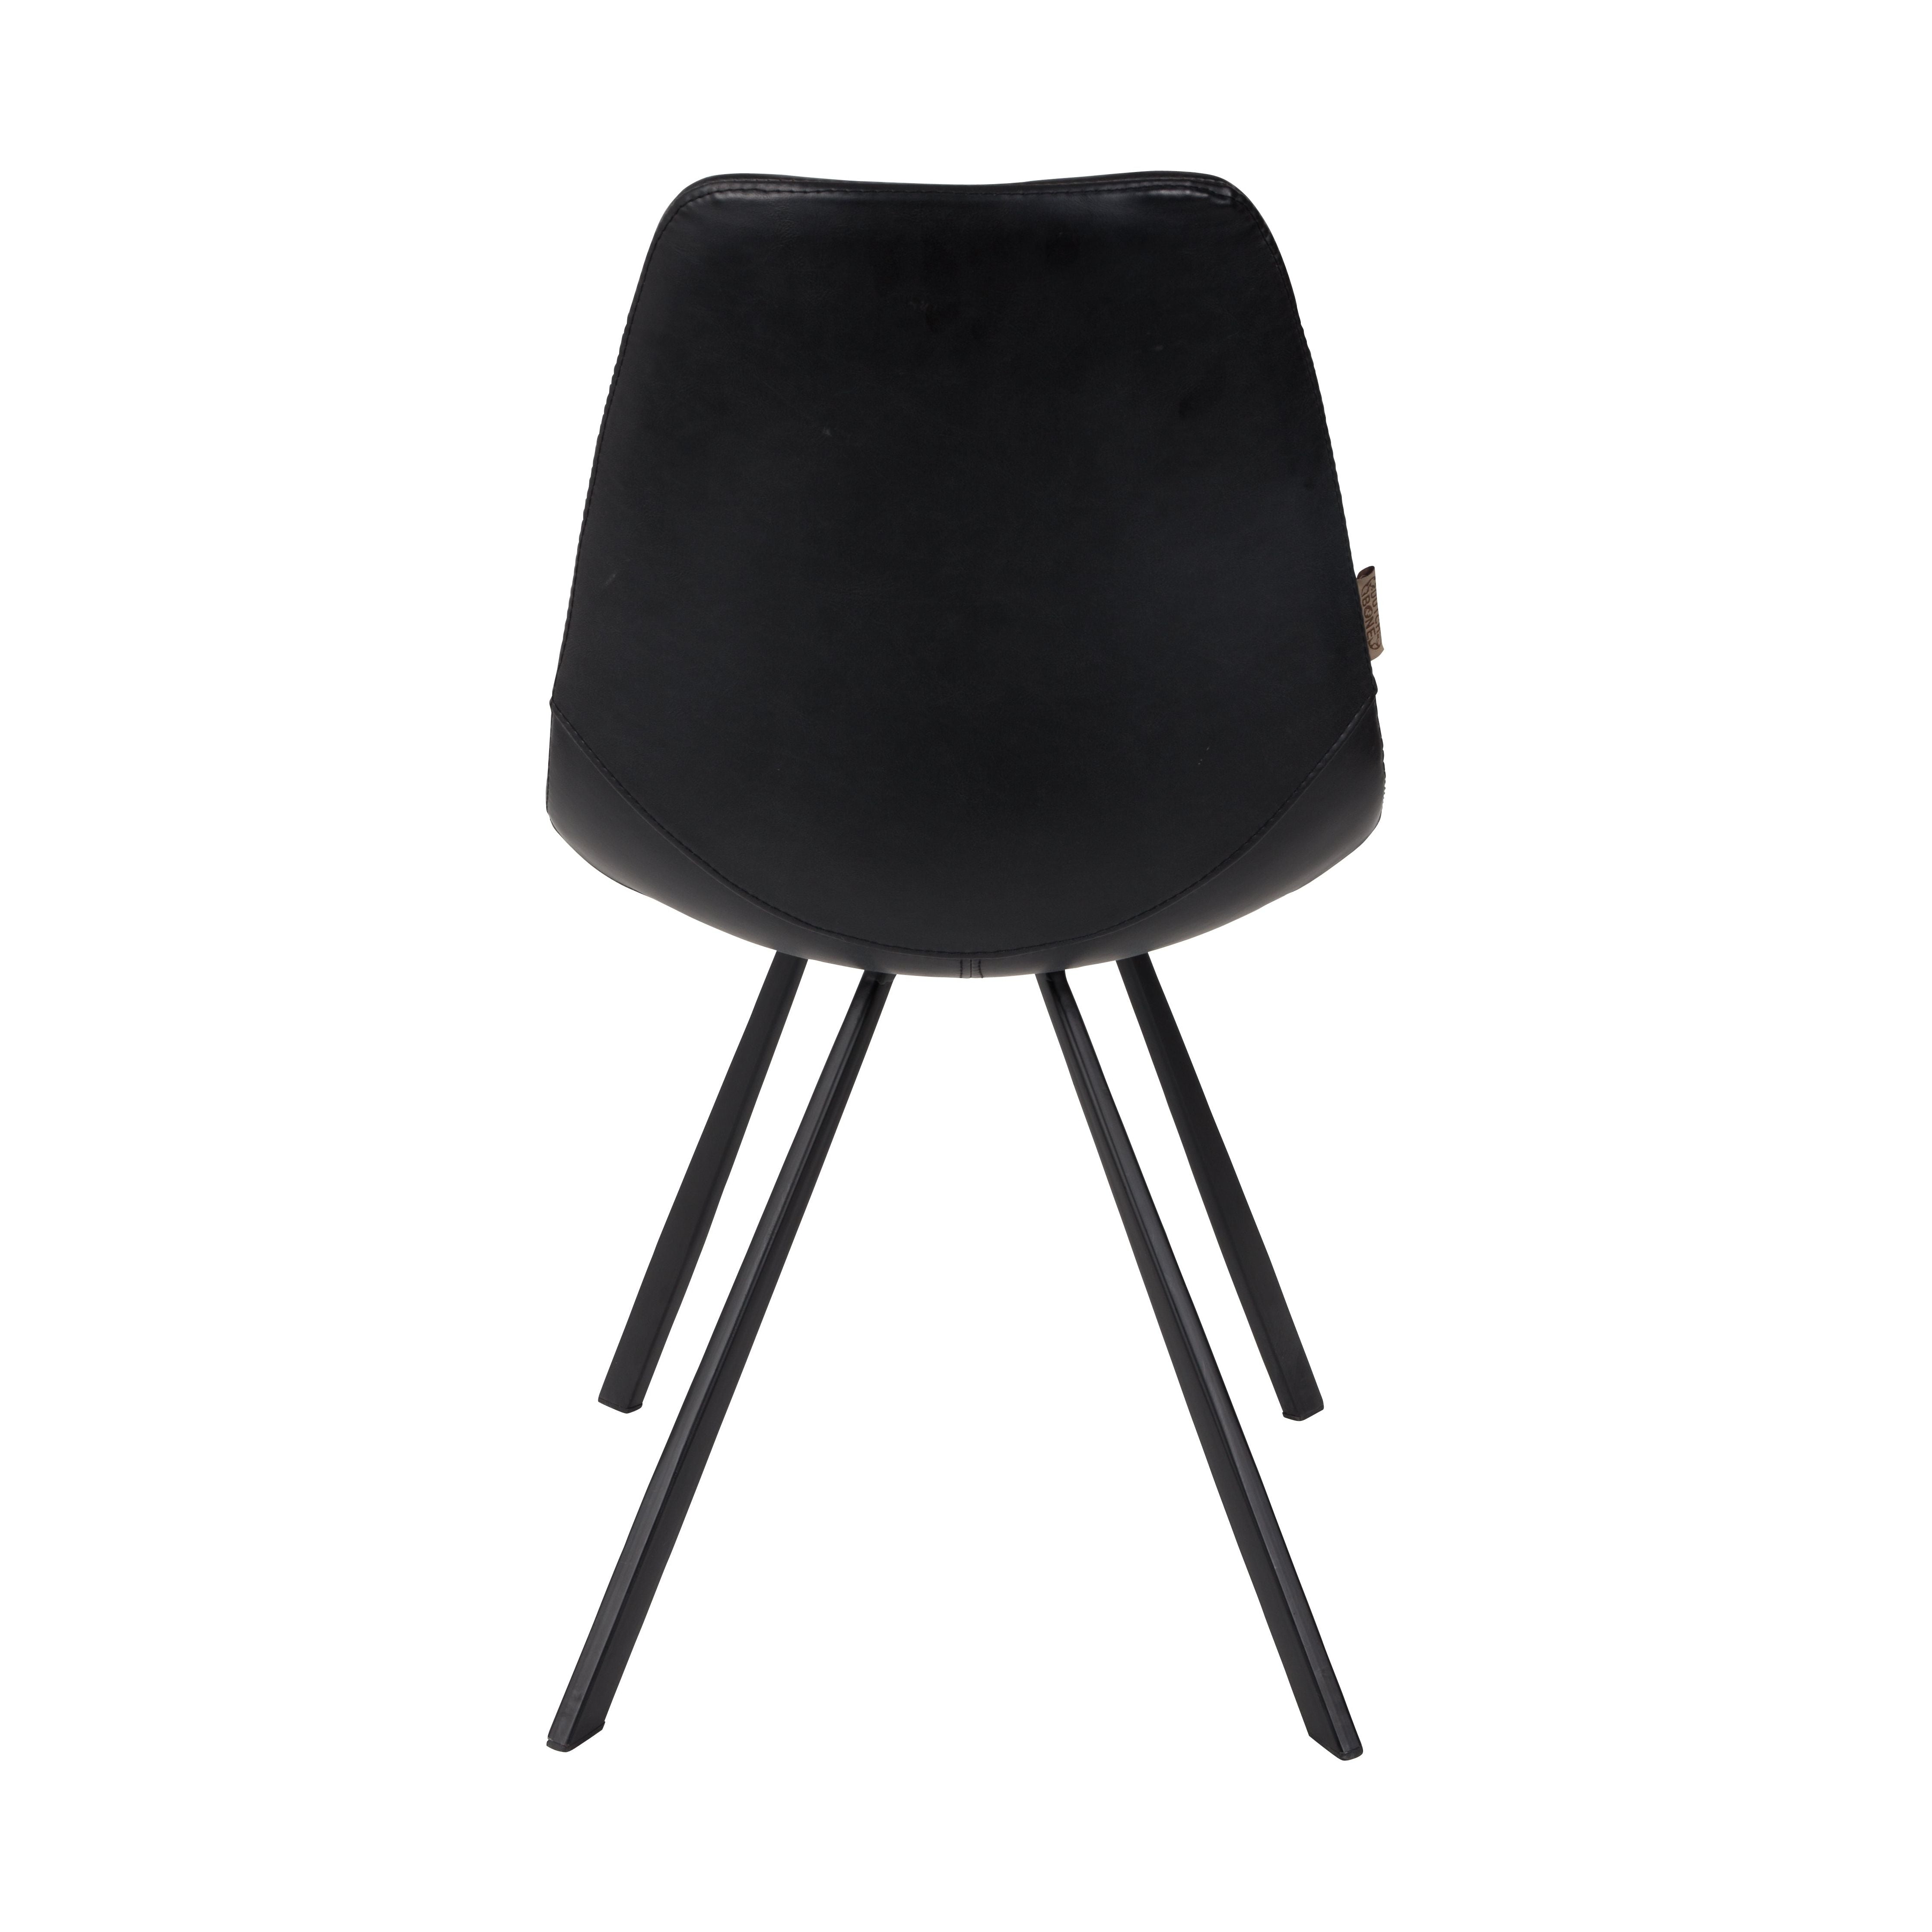 Chair franky black | 2 pieces